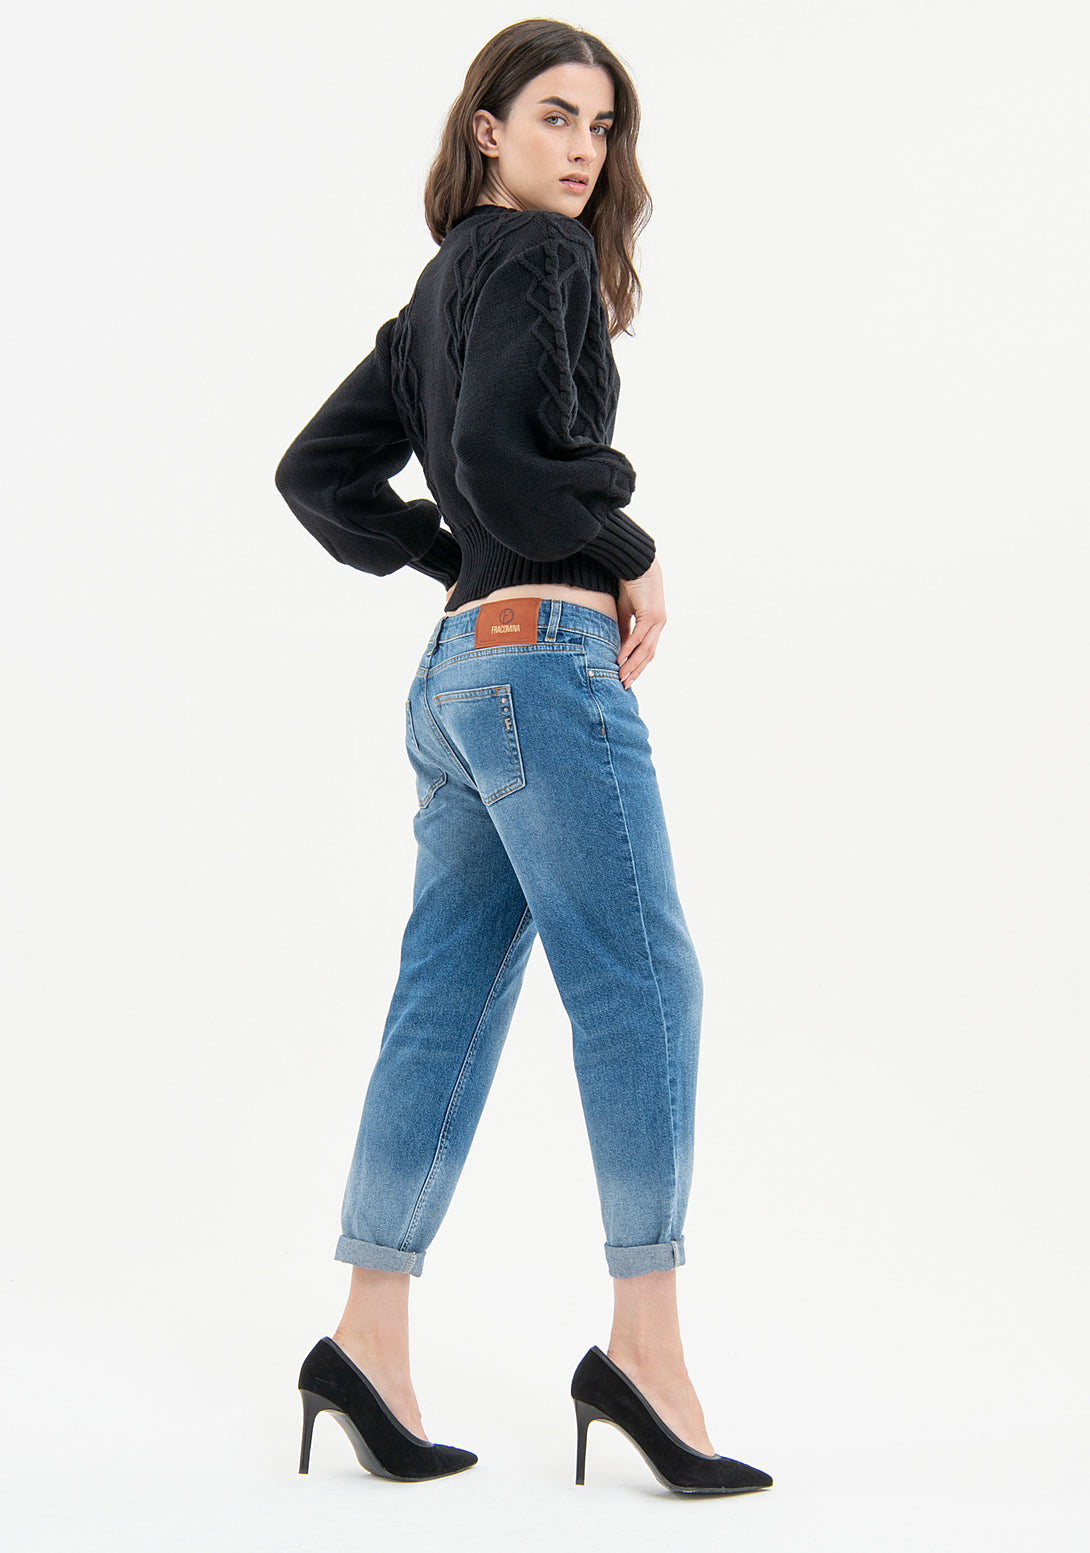 Jeans boyfriend fit made in denim with middle wash with stone Fracomina FP23WV5002D41902-B87-4